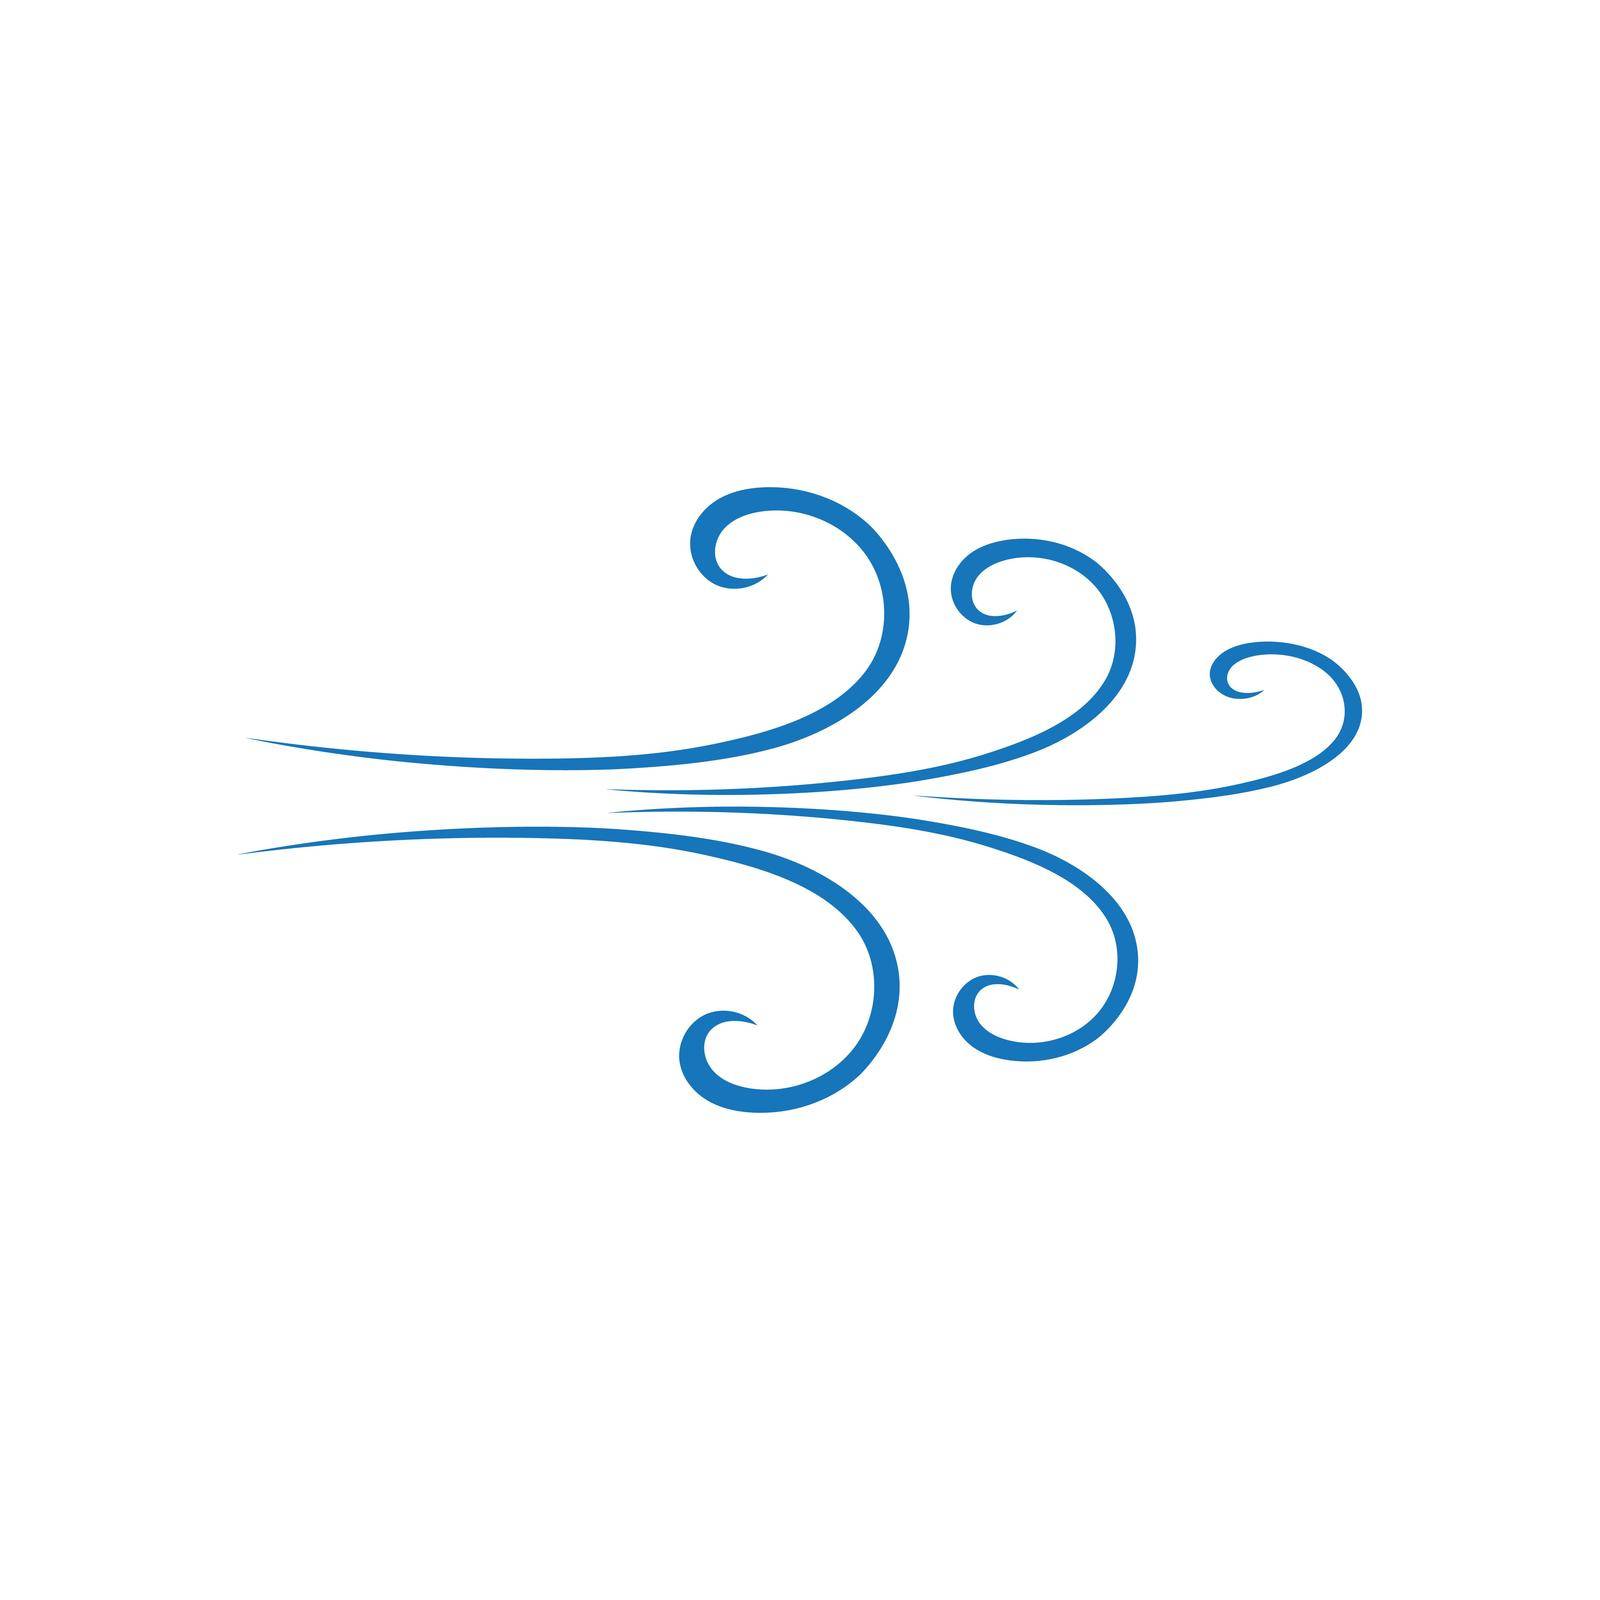 Wind icon logo free vector design by ABD03